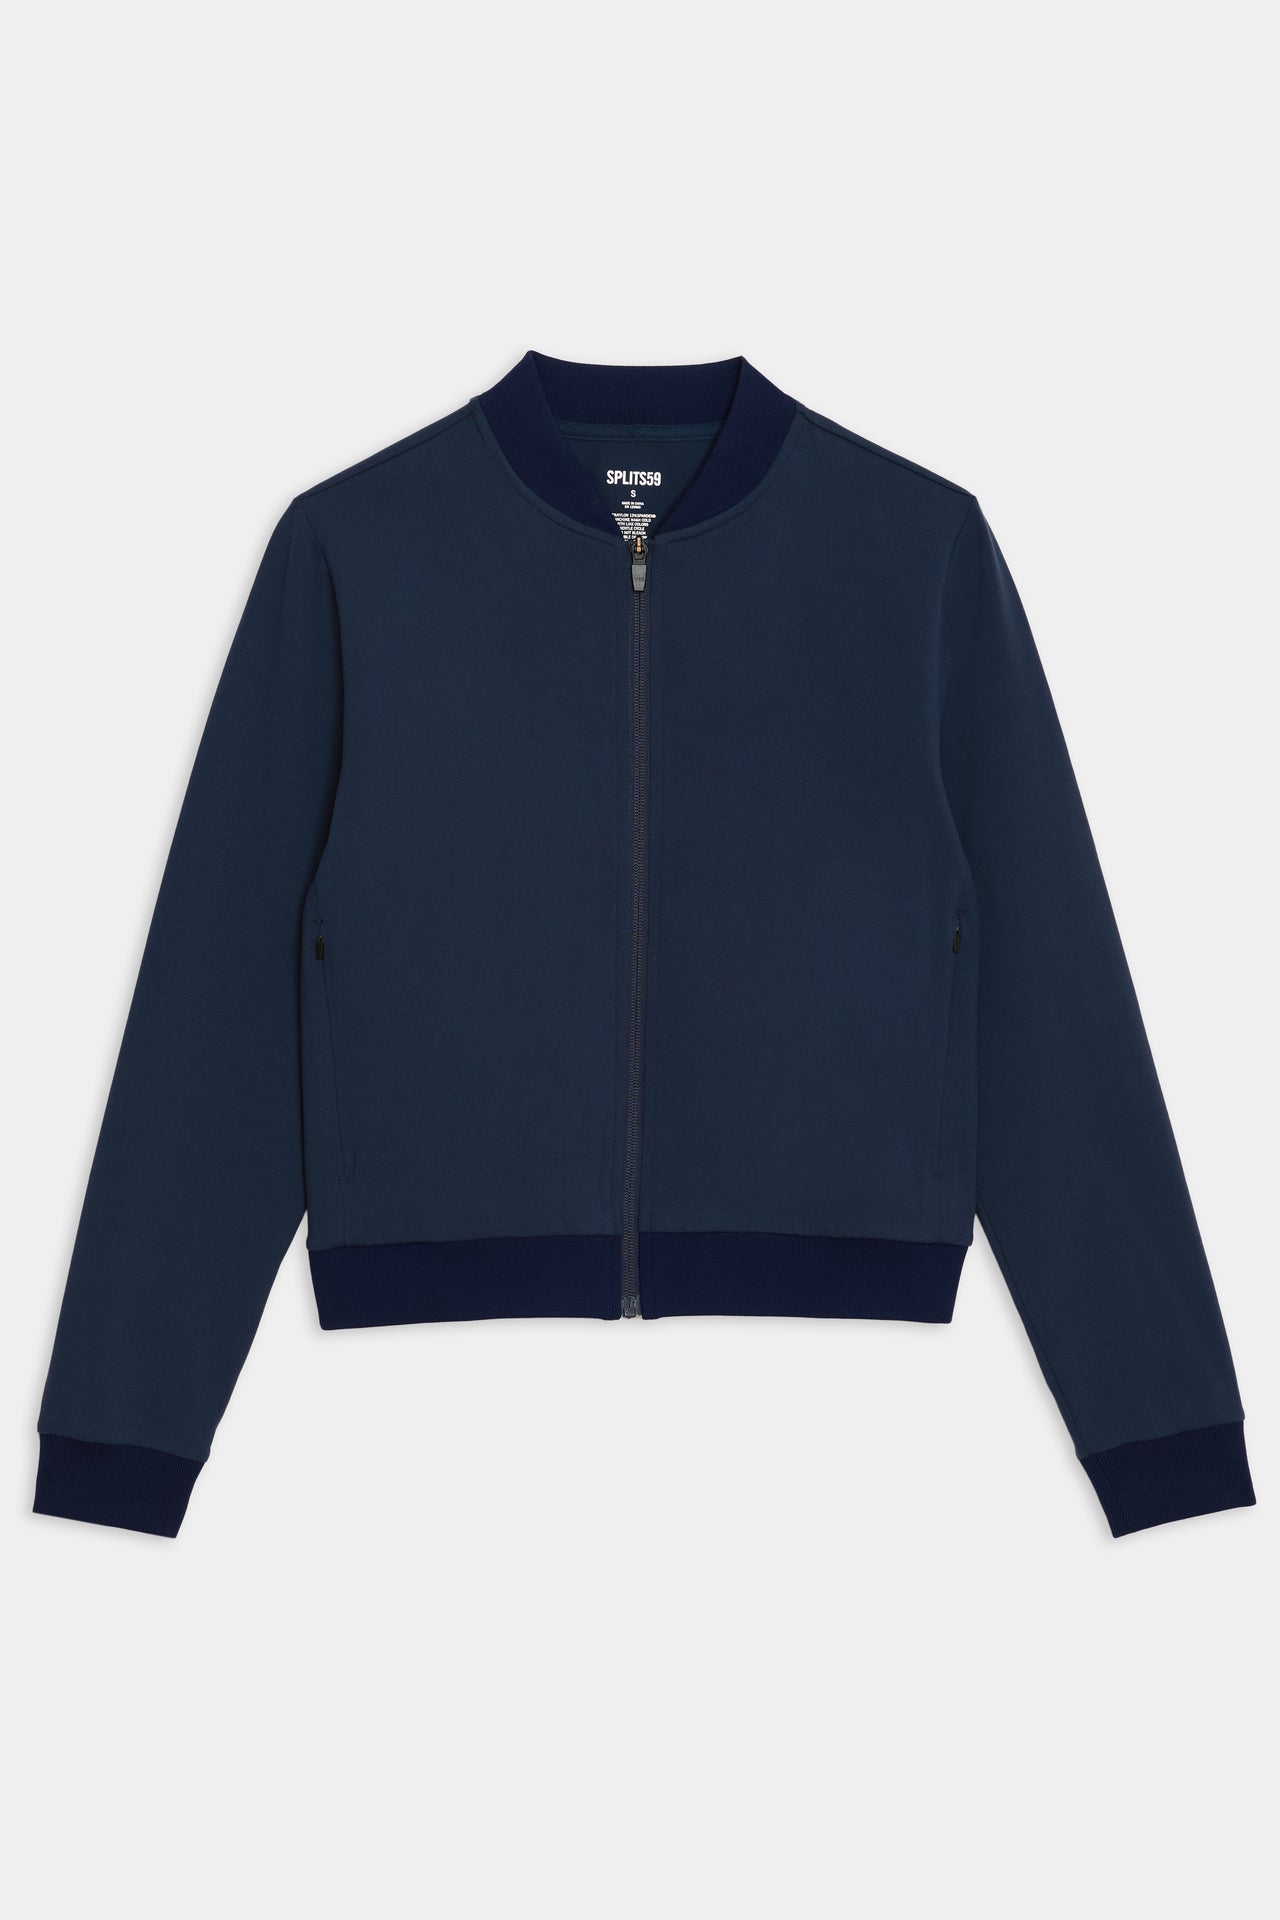 Front flat view of dark blue jacket zipped up